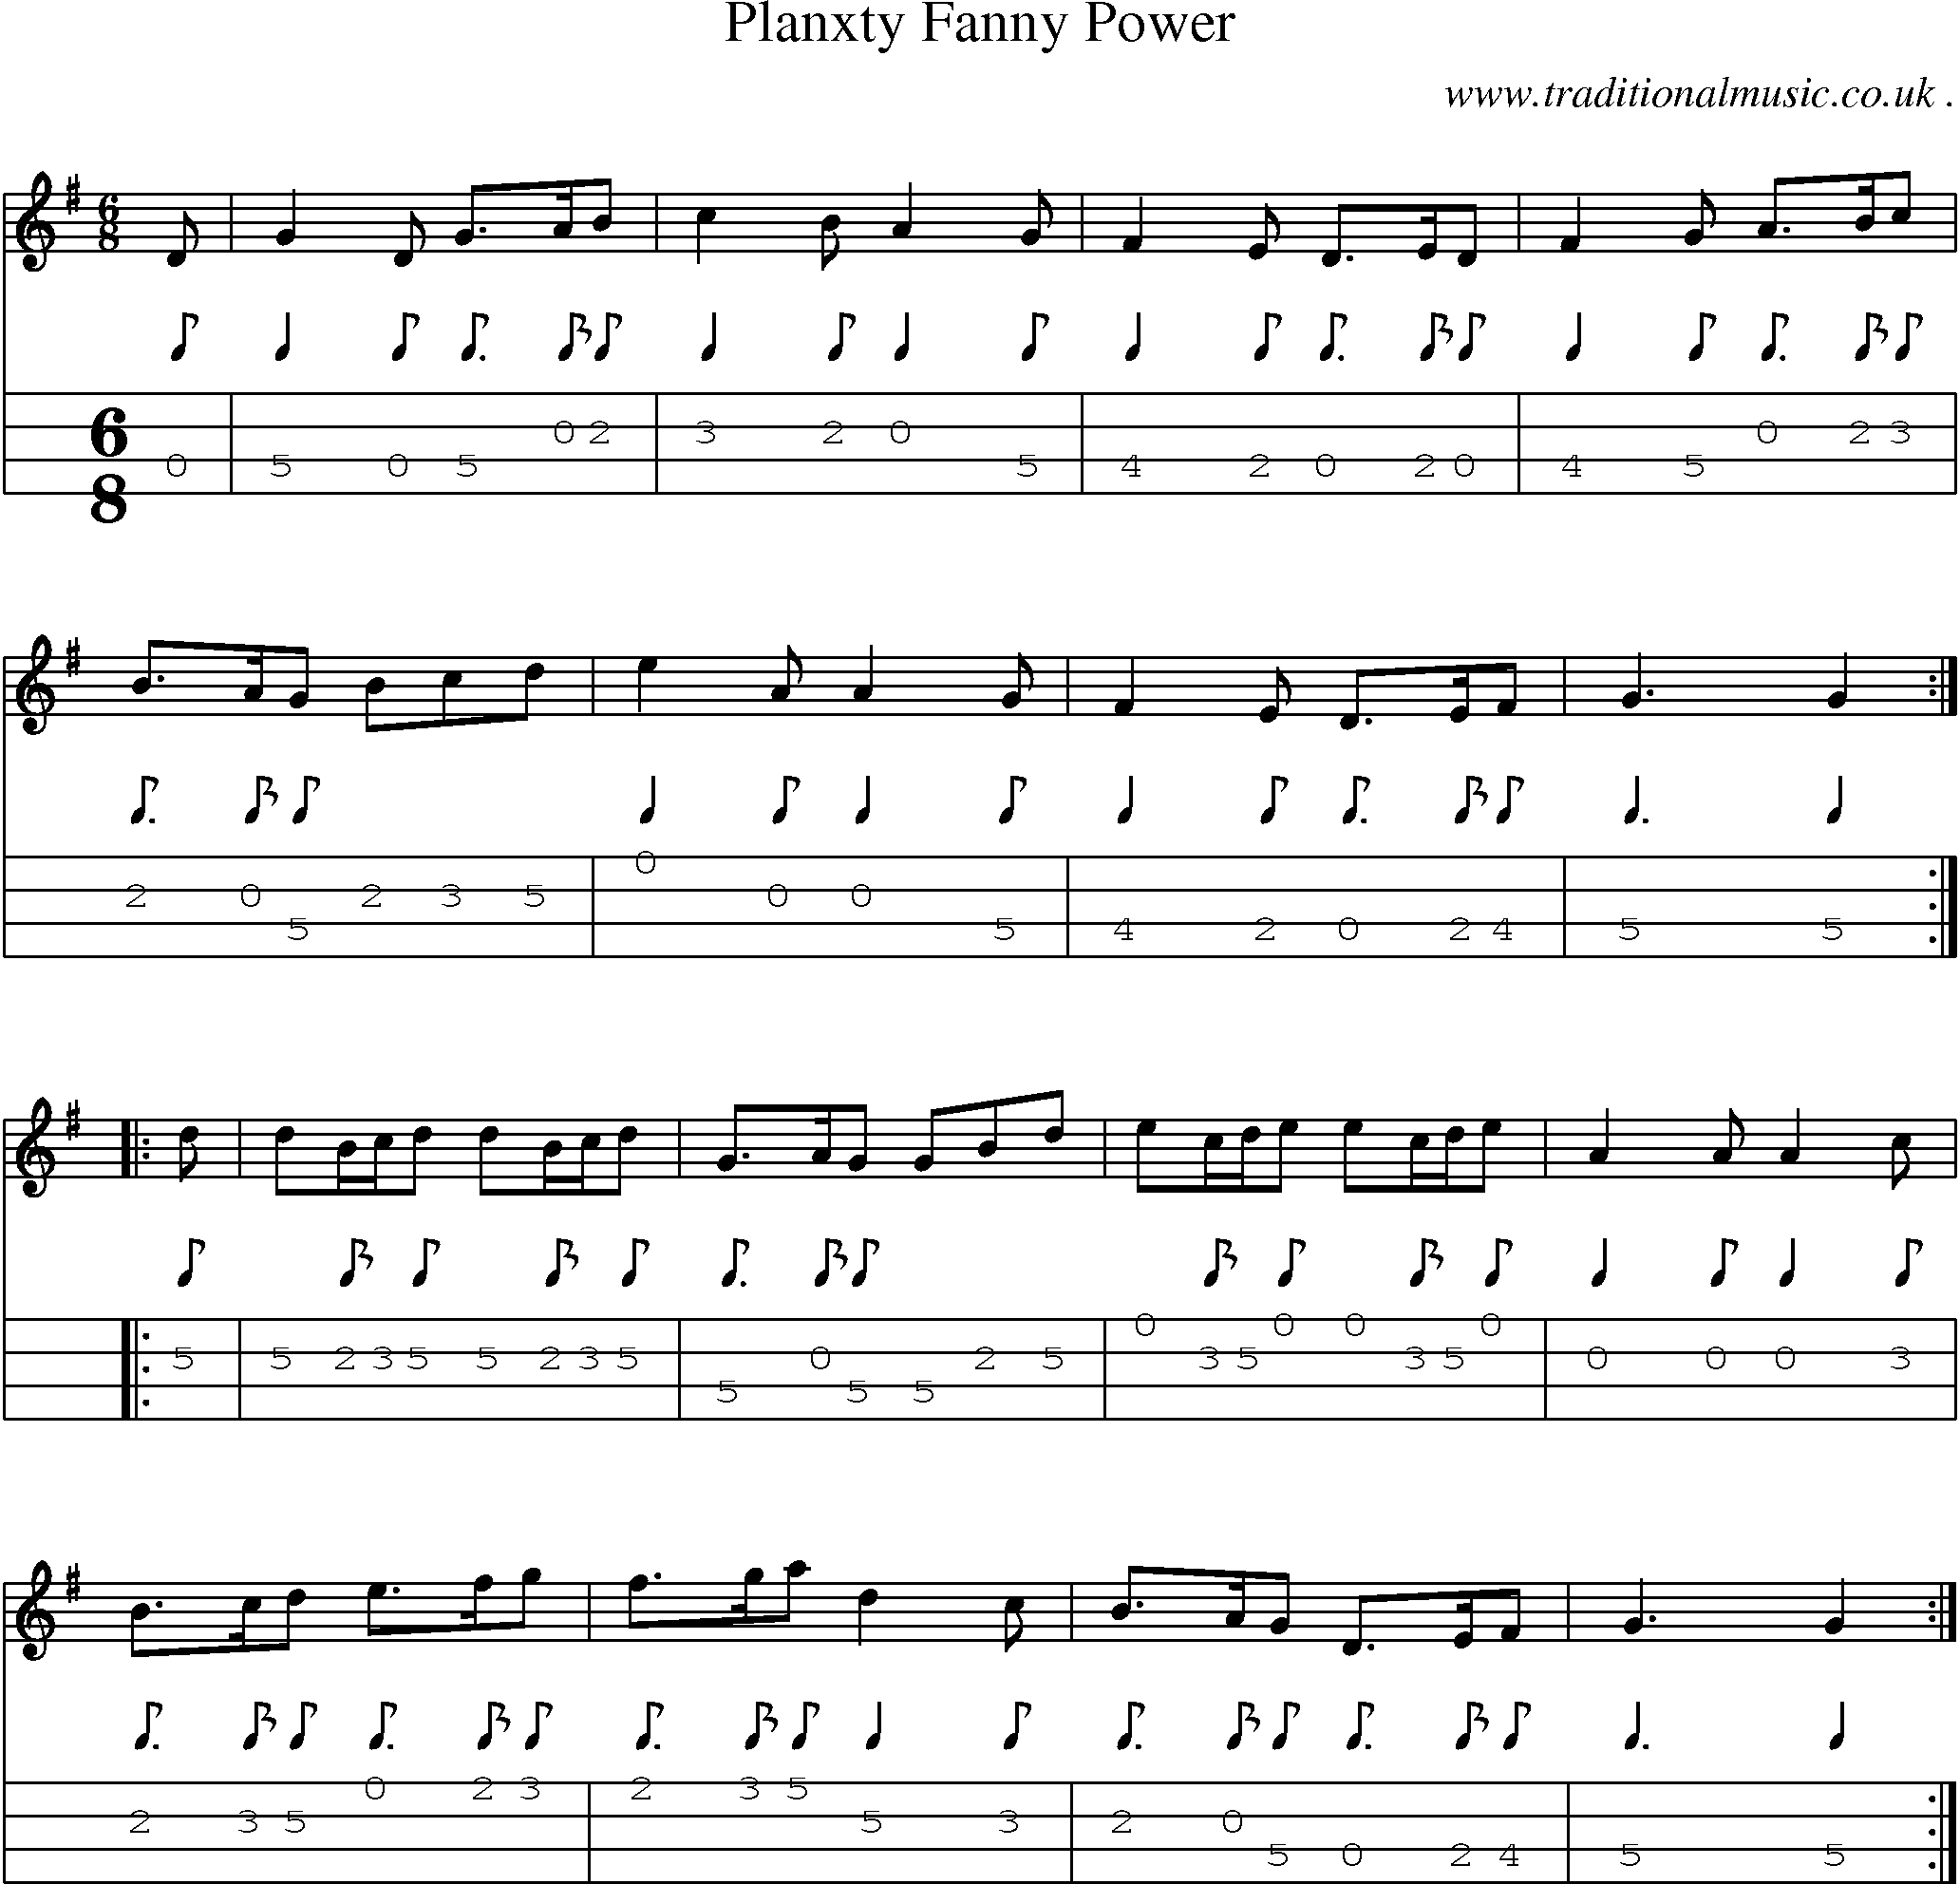 Sheet-Music and Mandolin Tabs for Planxty Fanny Power